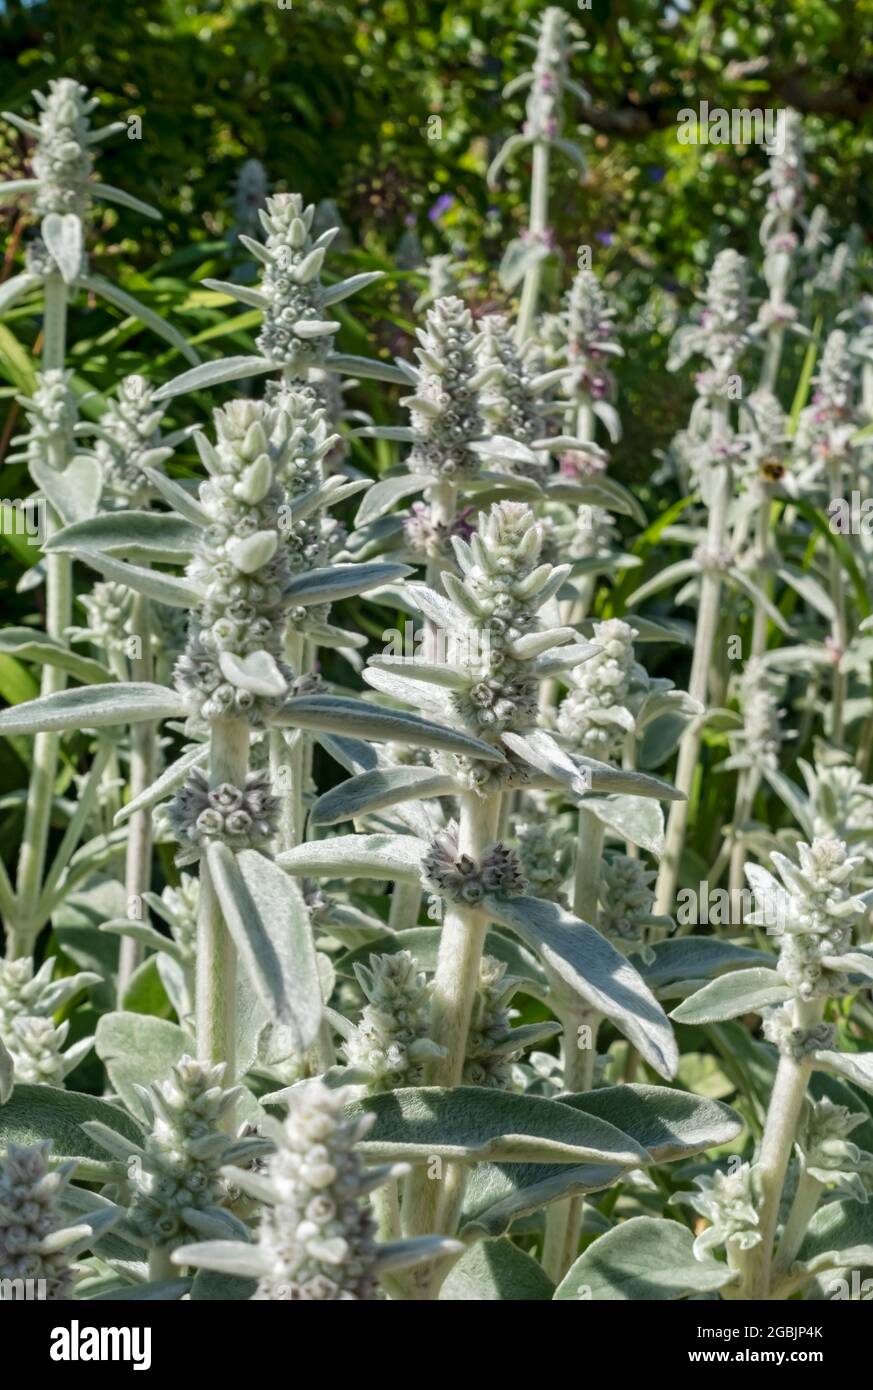 Close up of Lambs ear 'Silver Carpet' flowers (Stachys byzantina) in the garden in summer England UK United Kingdom GB Great Britain Stock Photo